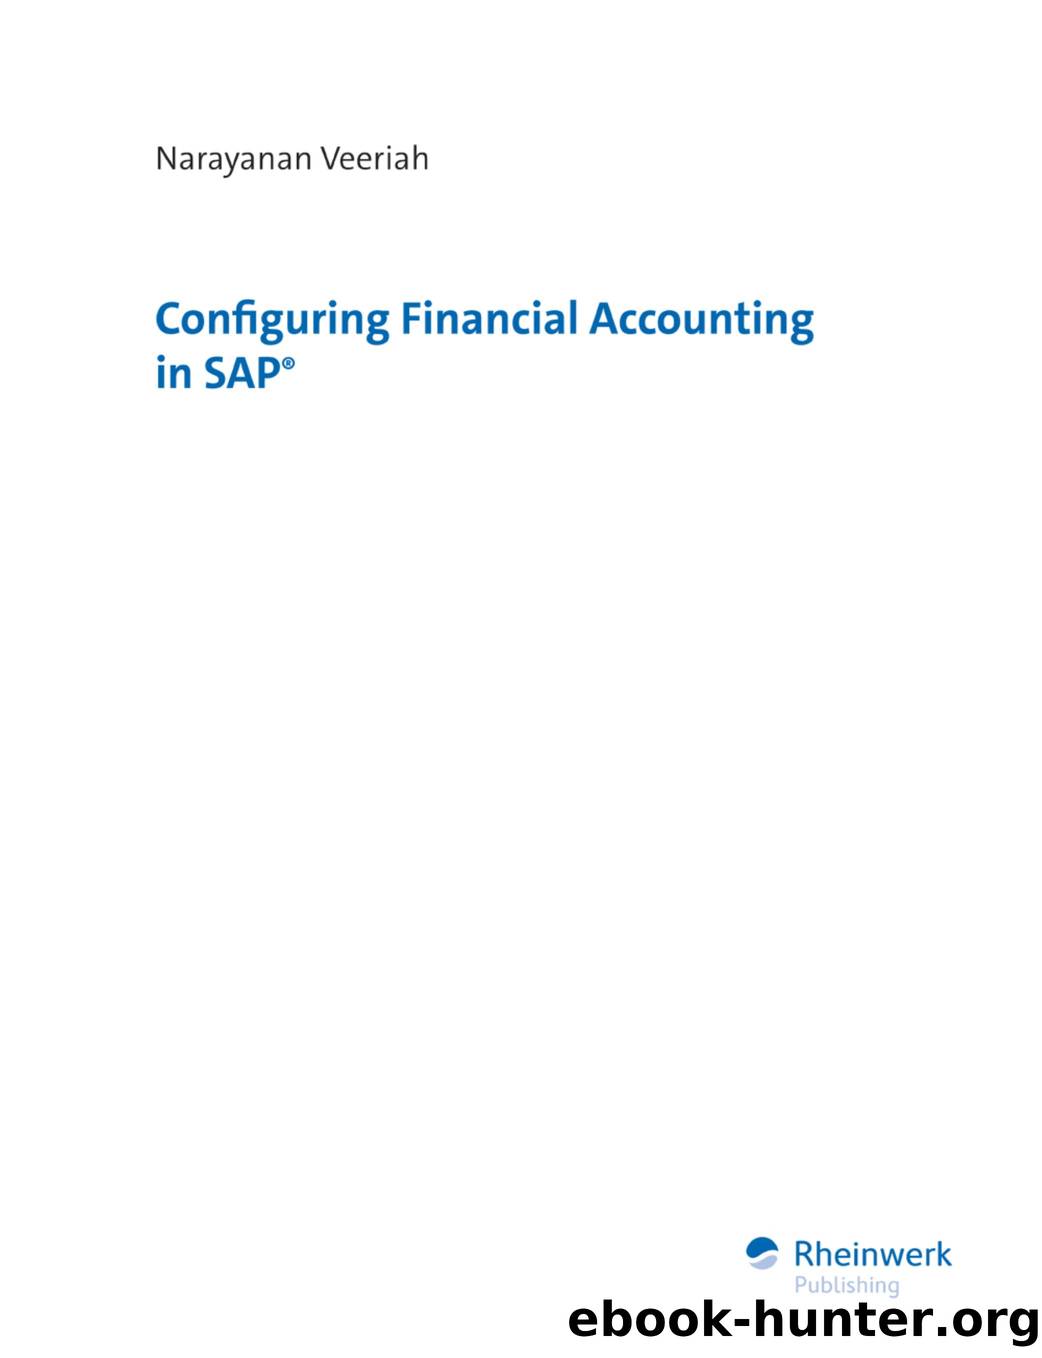 Configuring Financial Accounting in SAP by Unknown